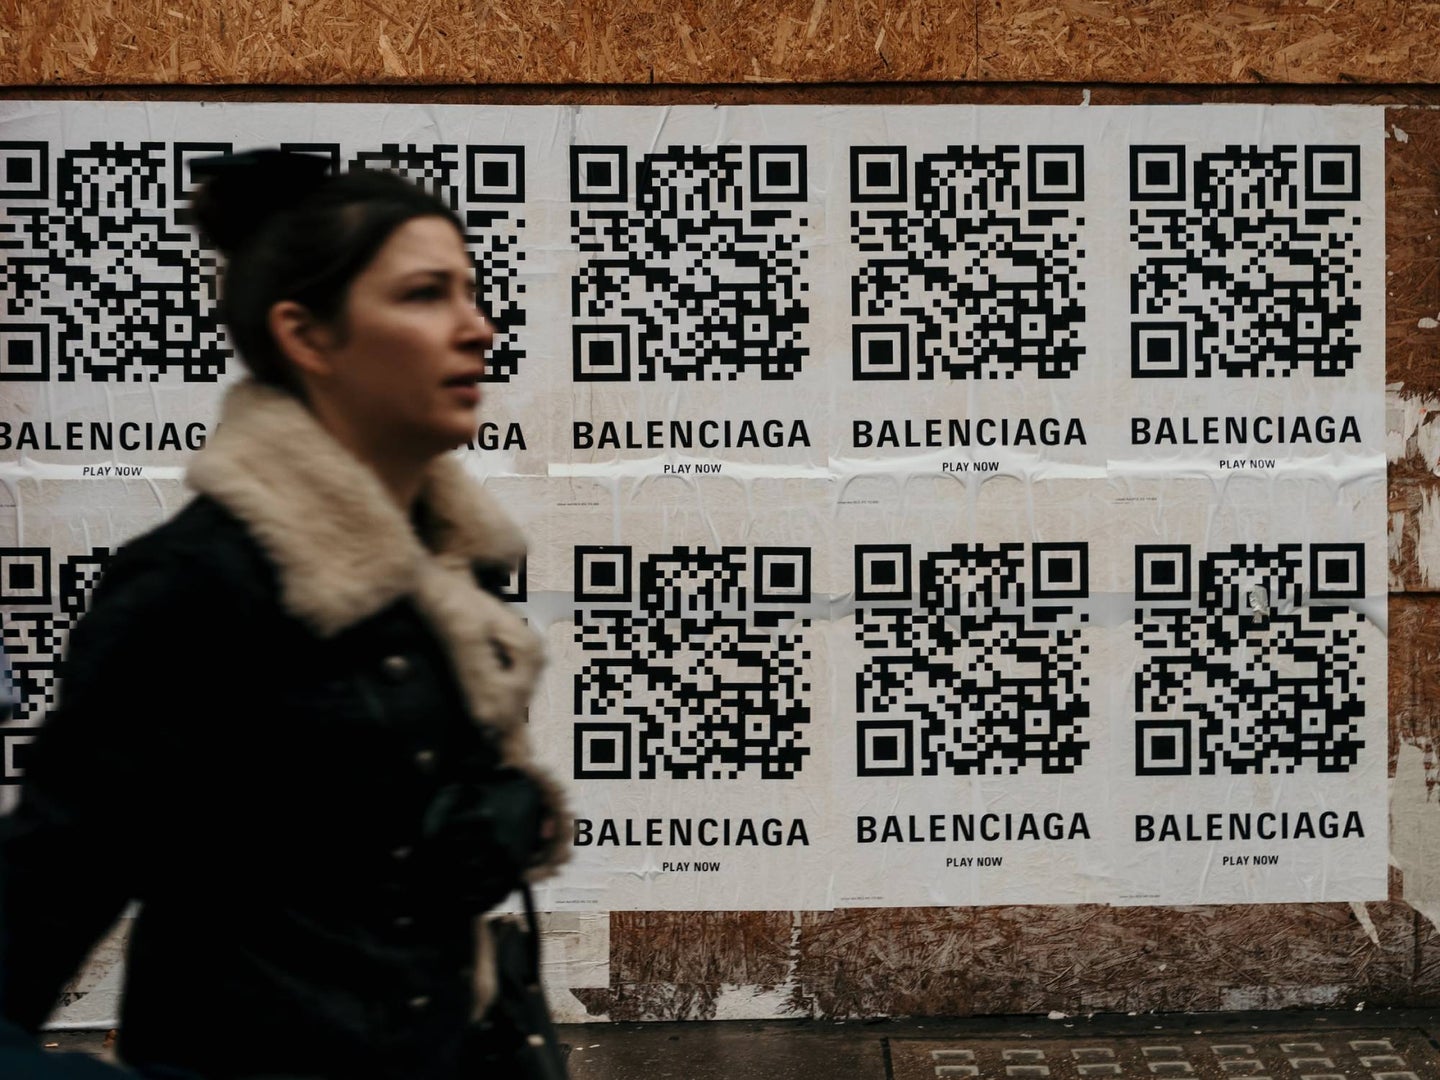 Person walking in front of posters with big QR codes